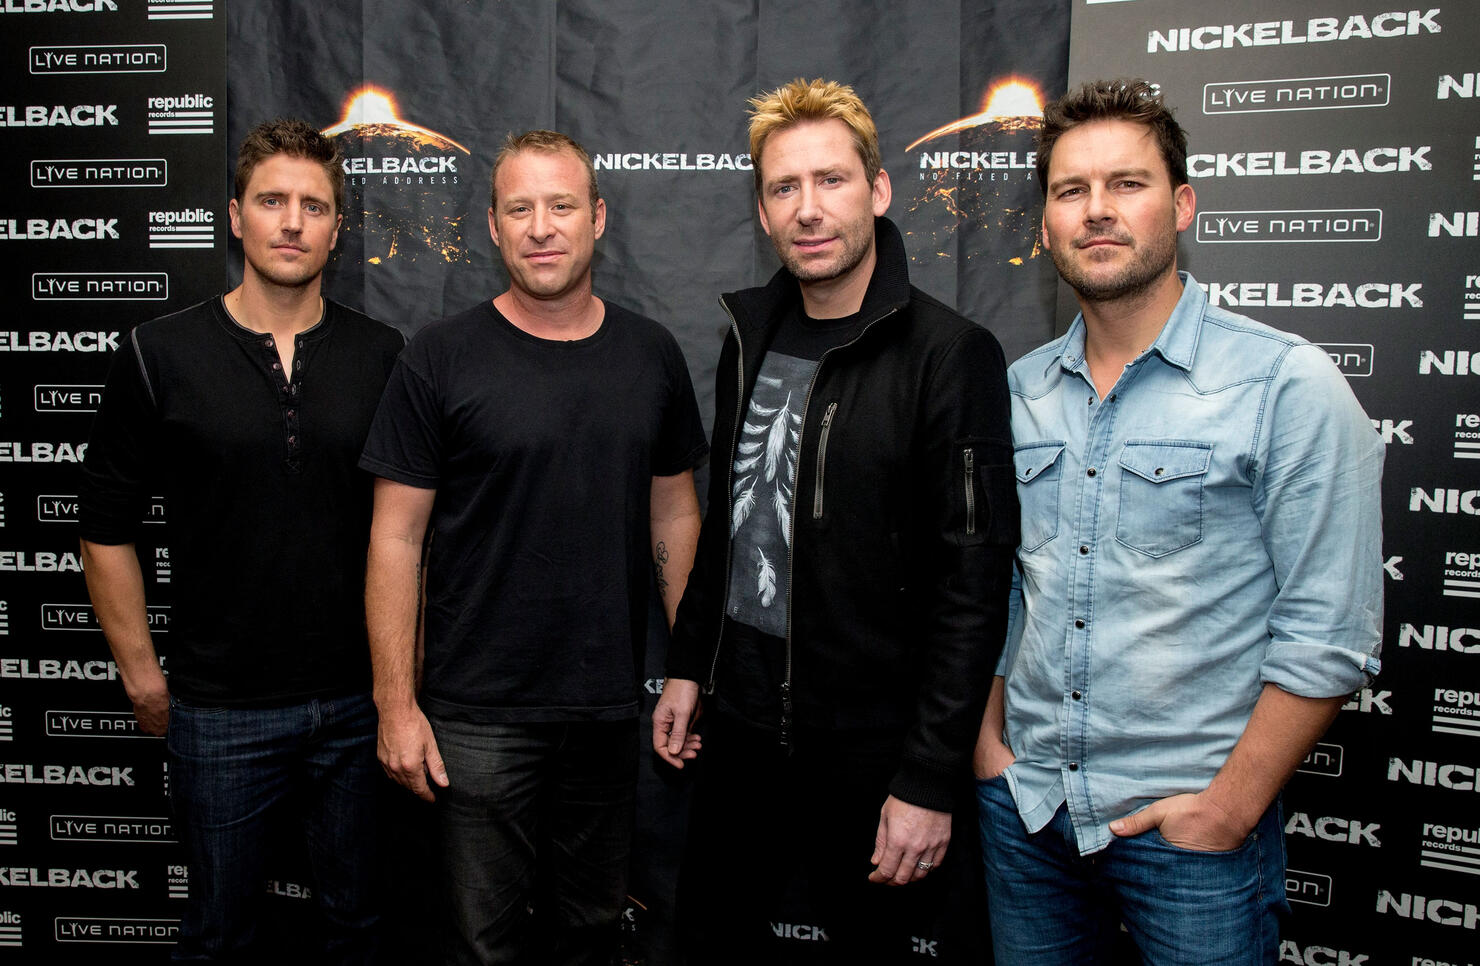 The merits of Nickelback as debated by Congress. 